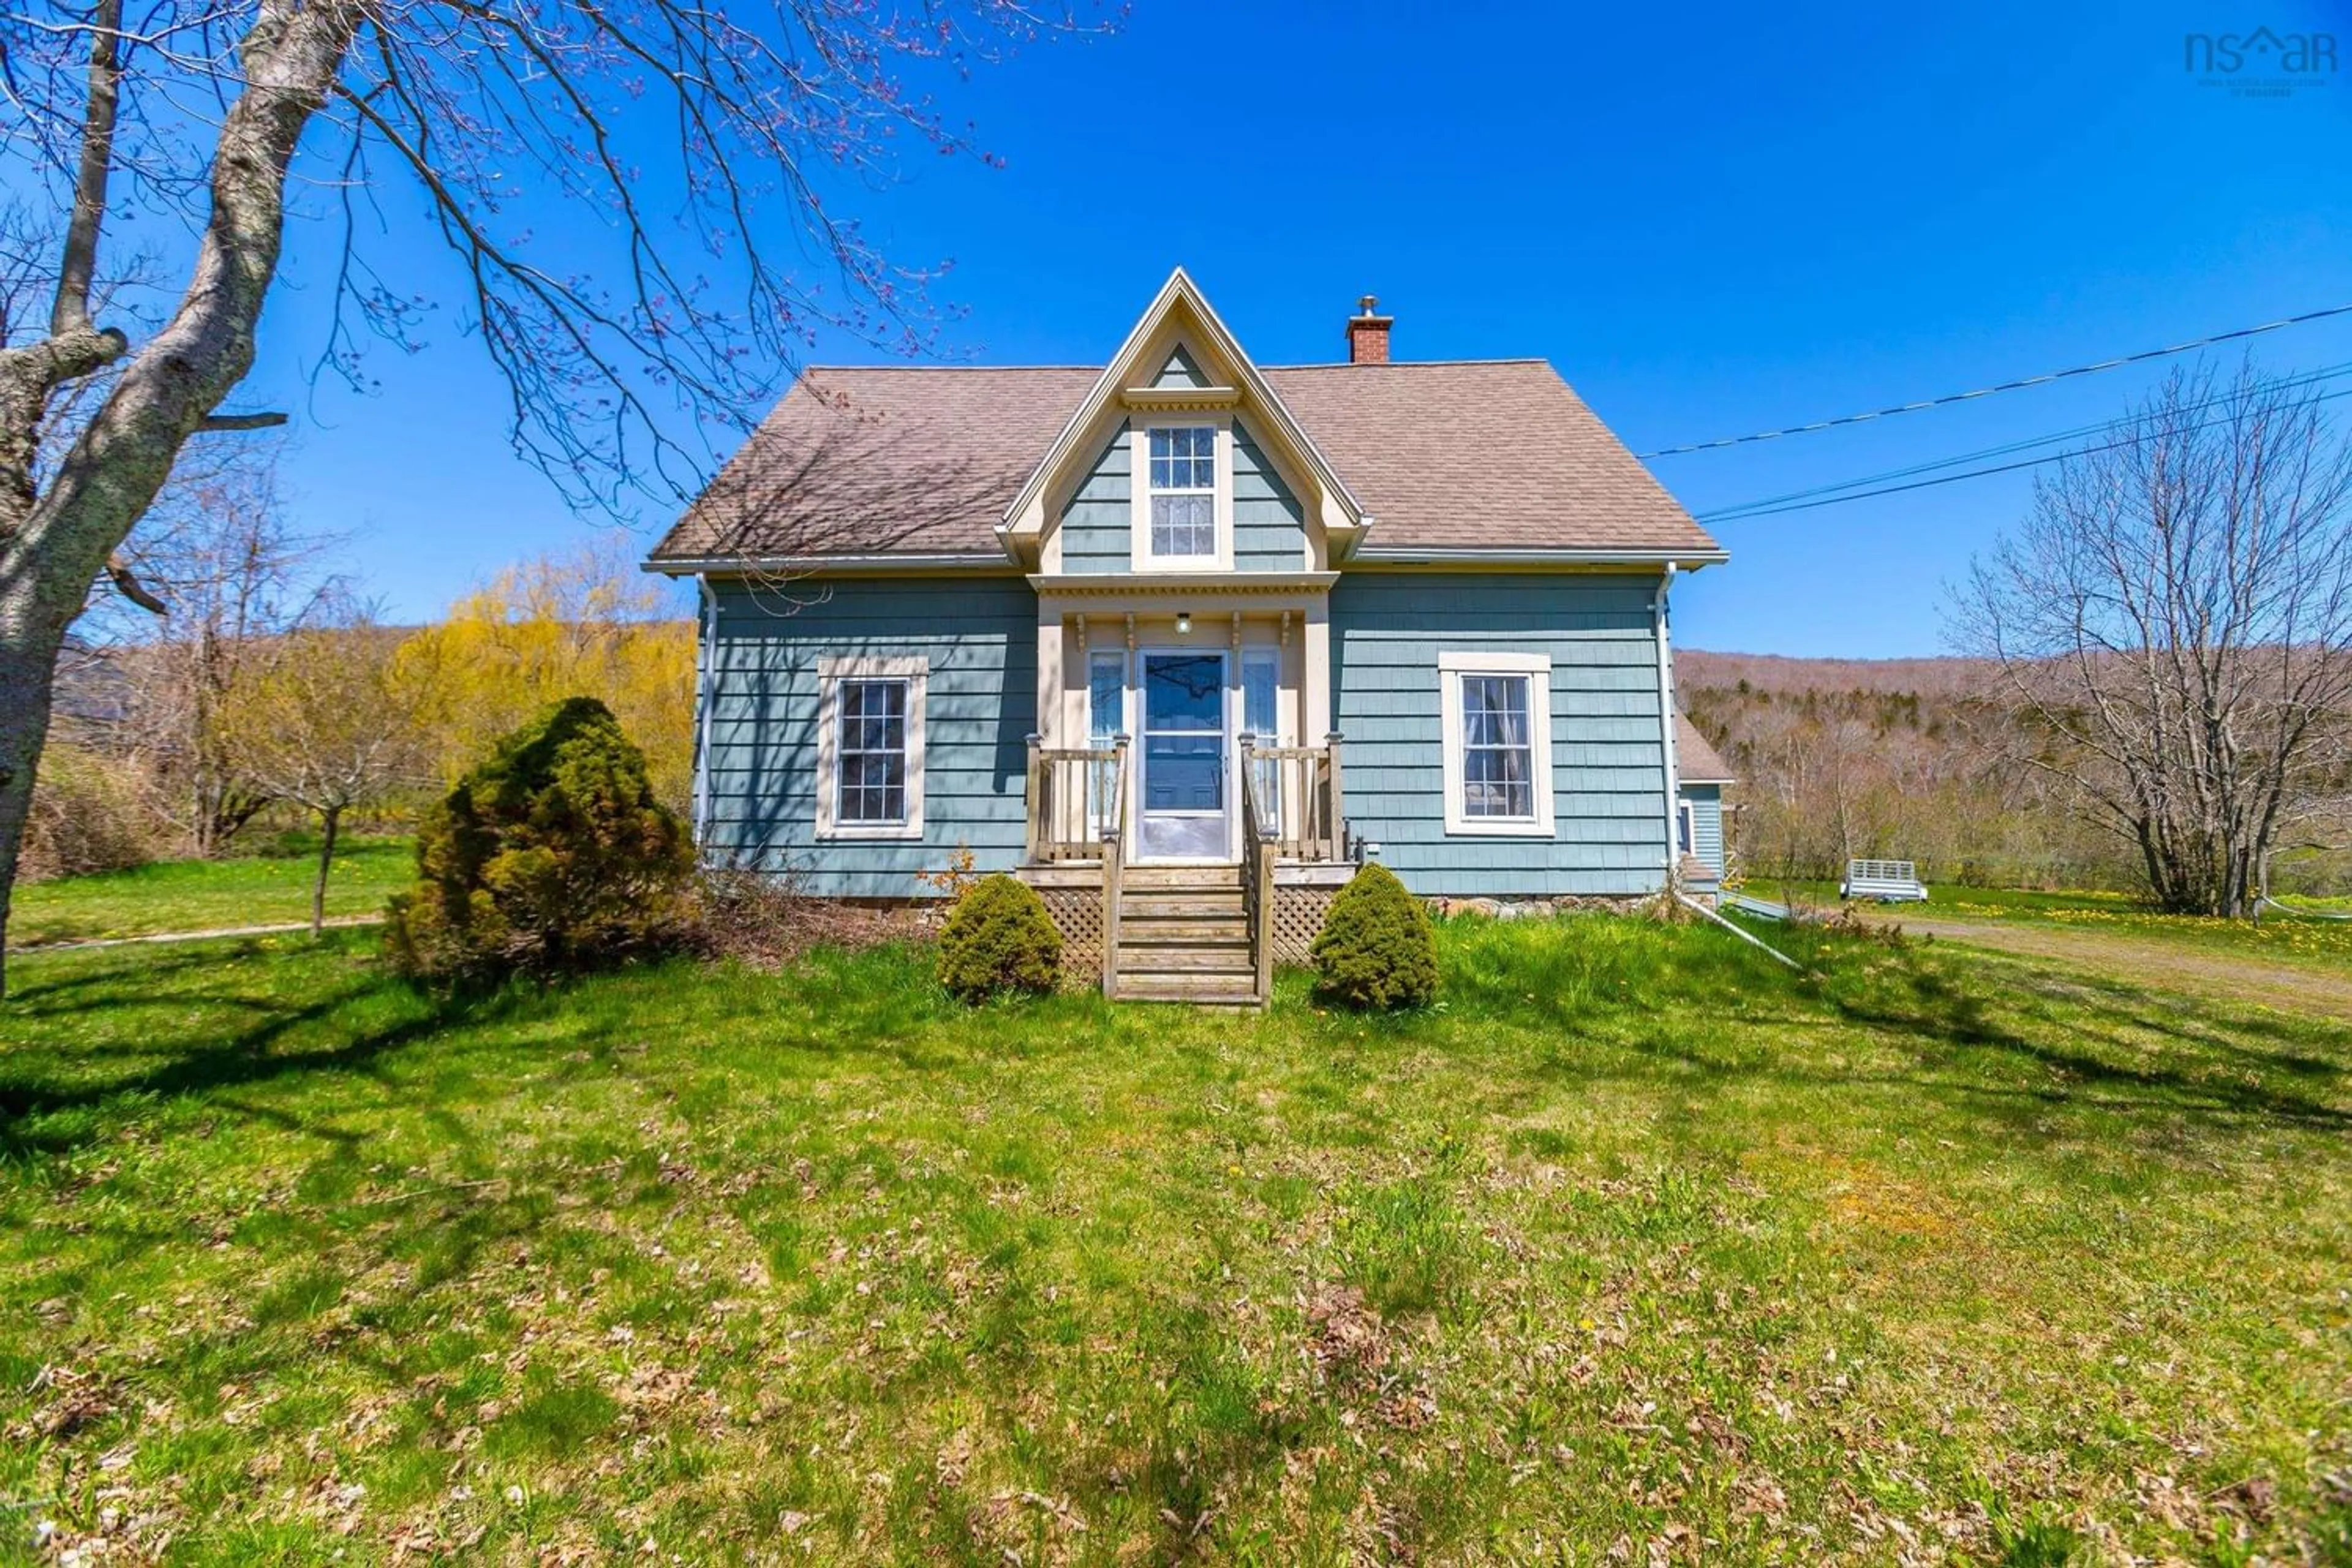 Cottage for 2669 Clarence Rd, Clarence Nova Scotia B0S 1C0